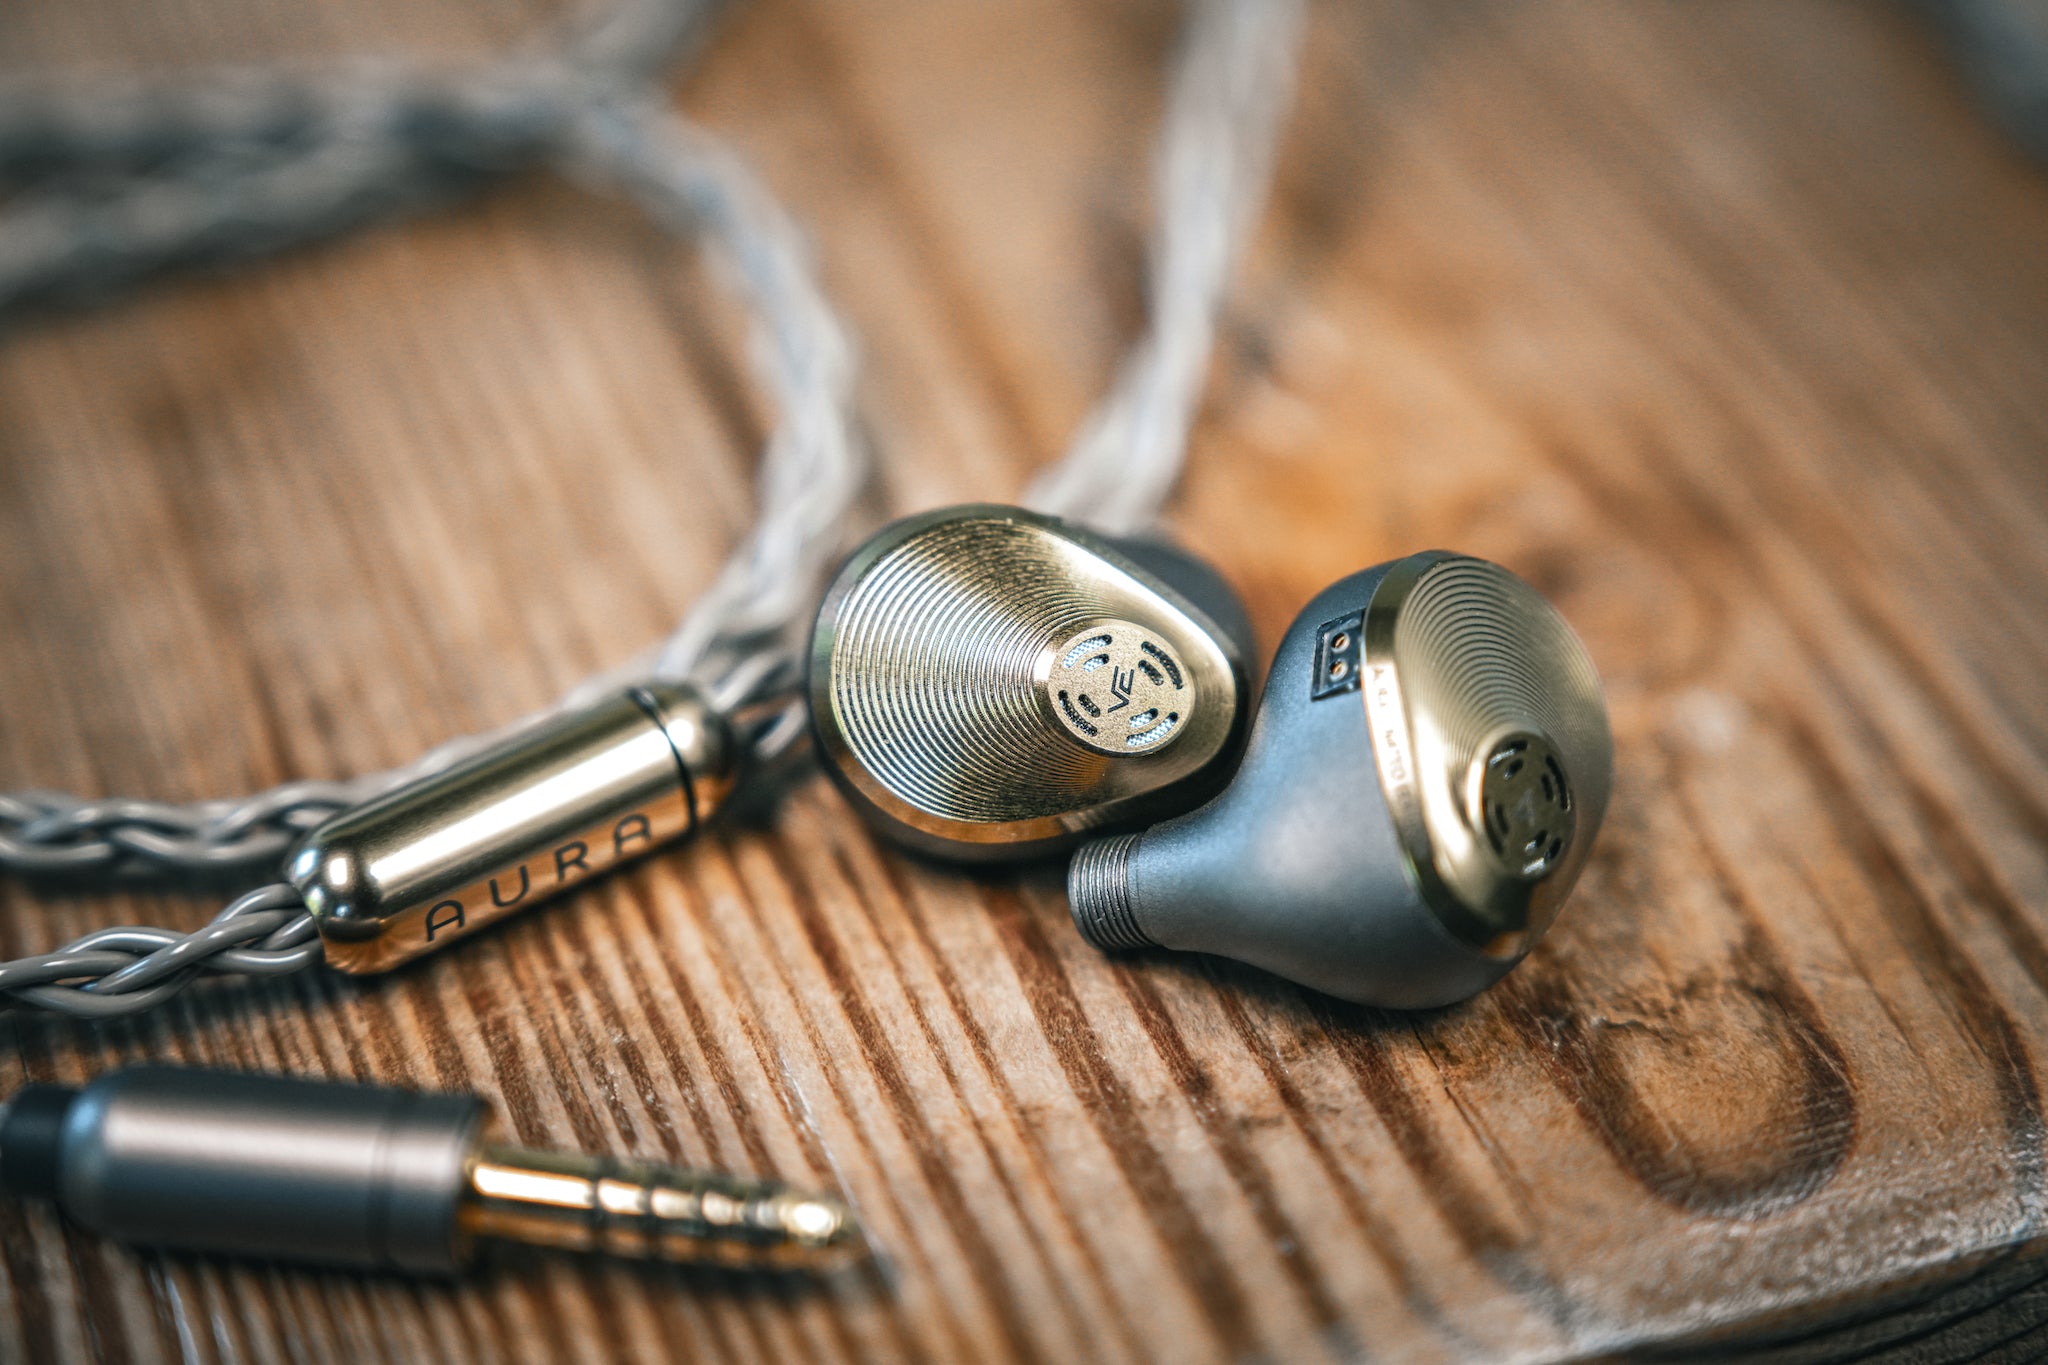 Luxurious Sound and Design | Astell&Kern x Vision Ears Aura Review